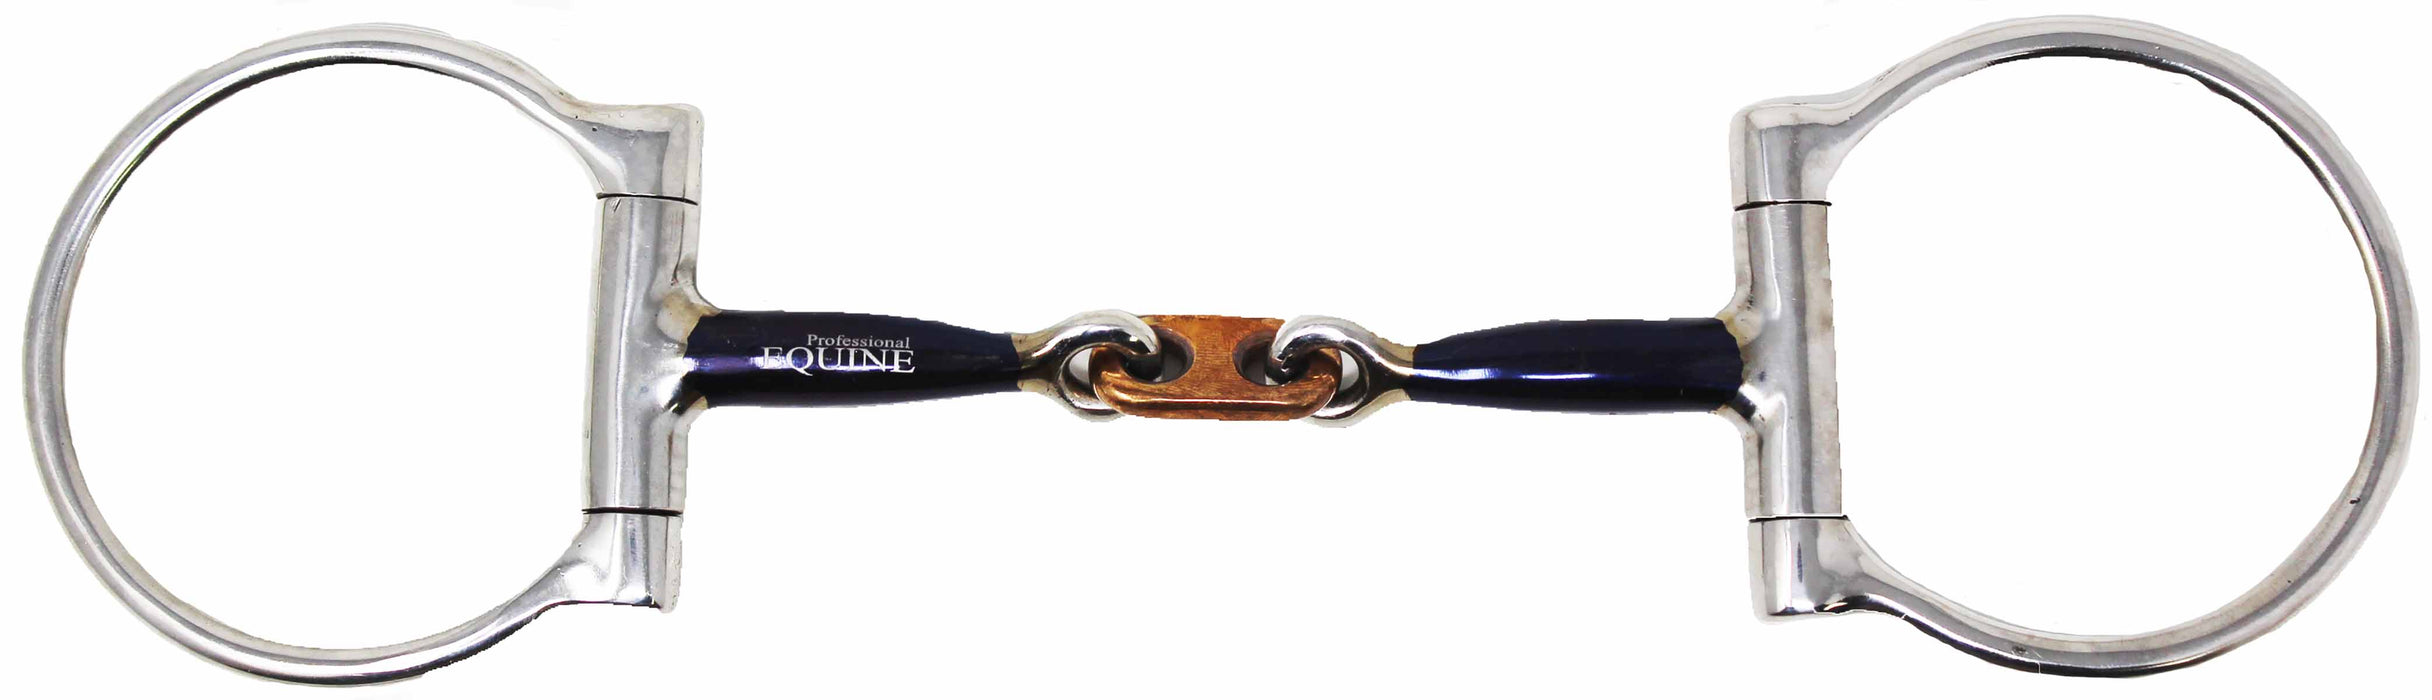 SS Dee-Ring 5" Sweet Iron Copper French Link Double-Jointed Snaffle Horse Bit 35671B